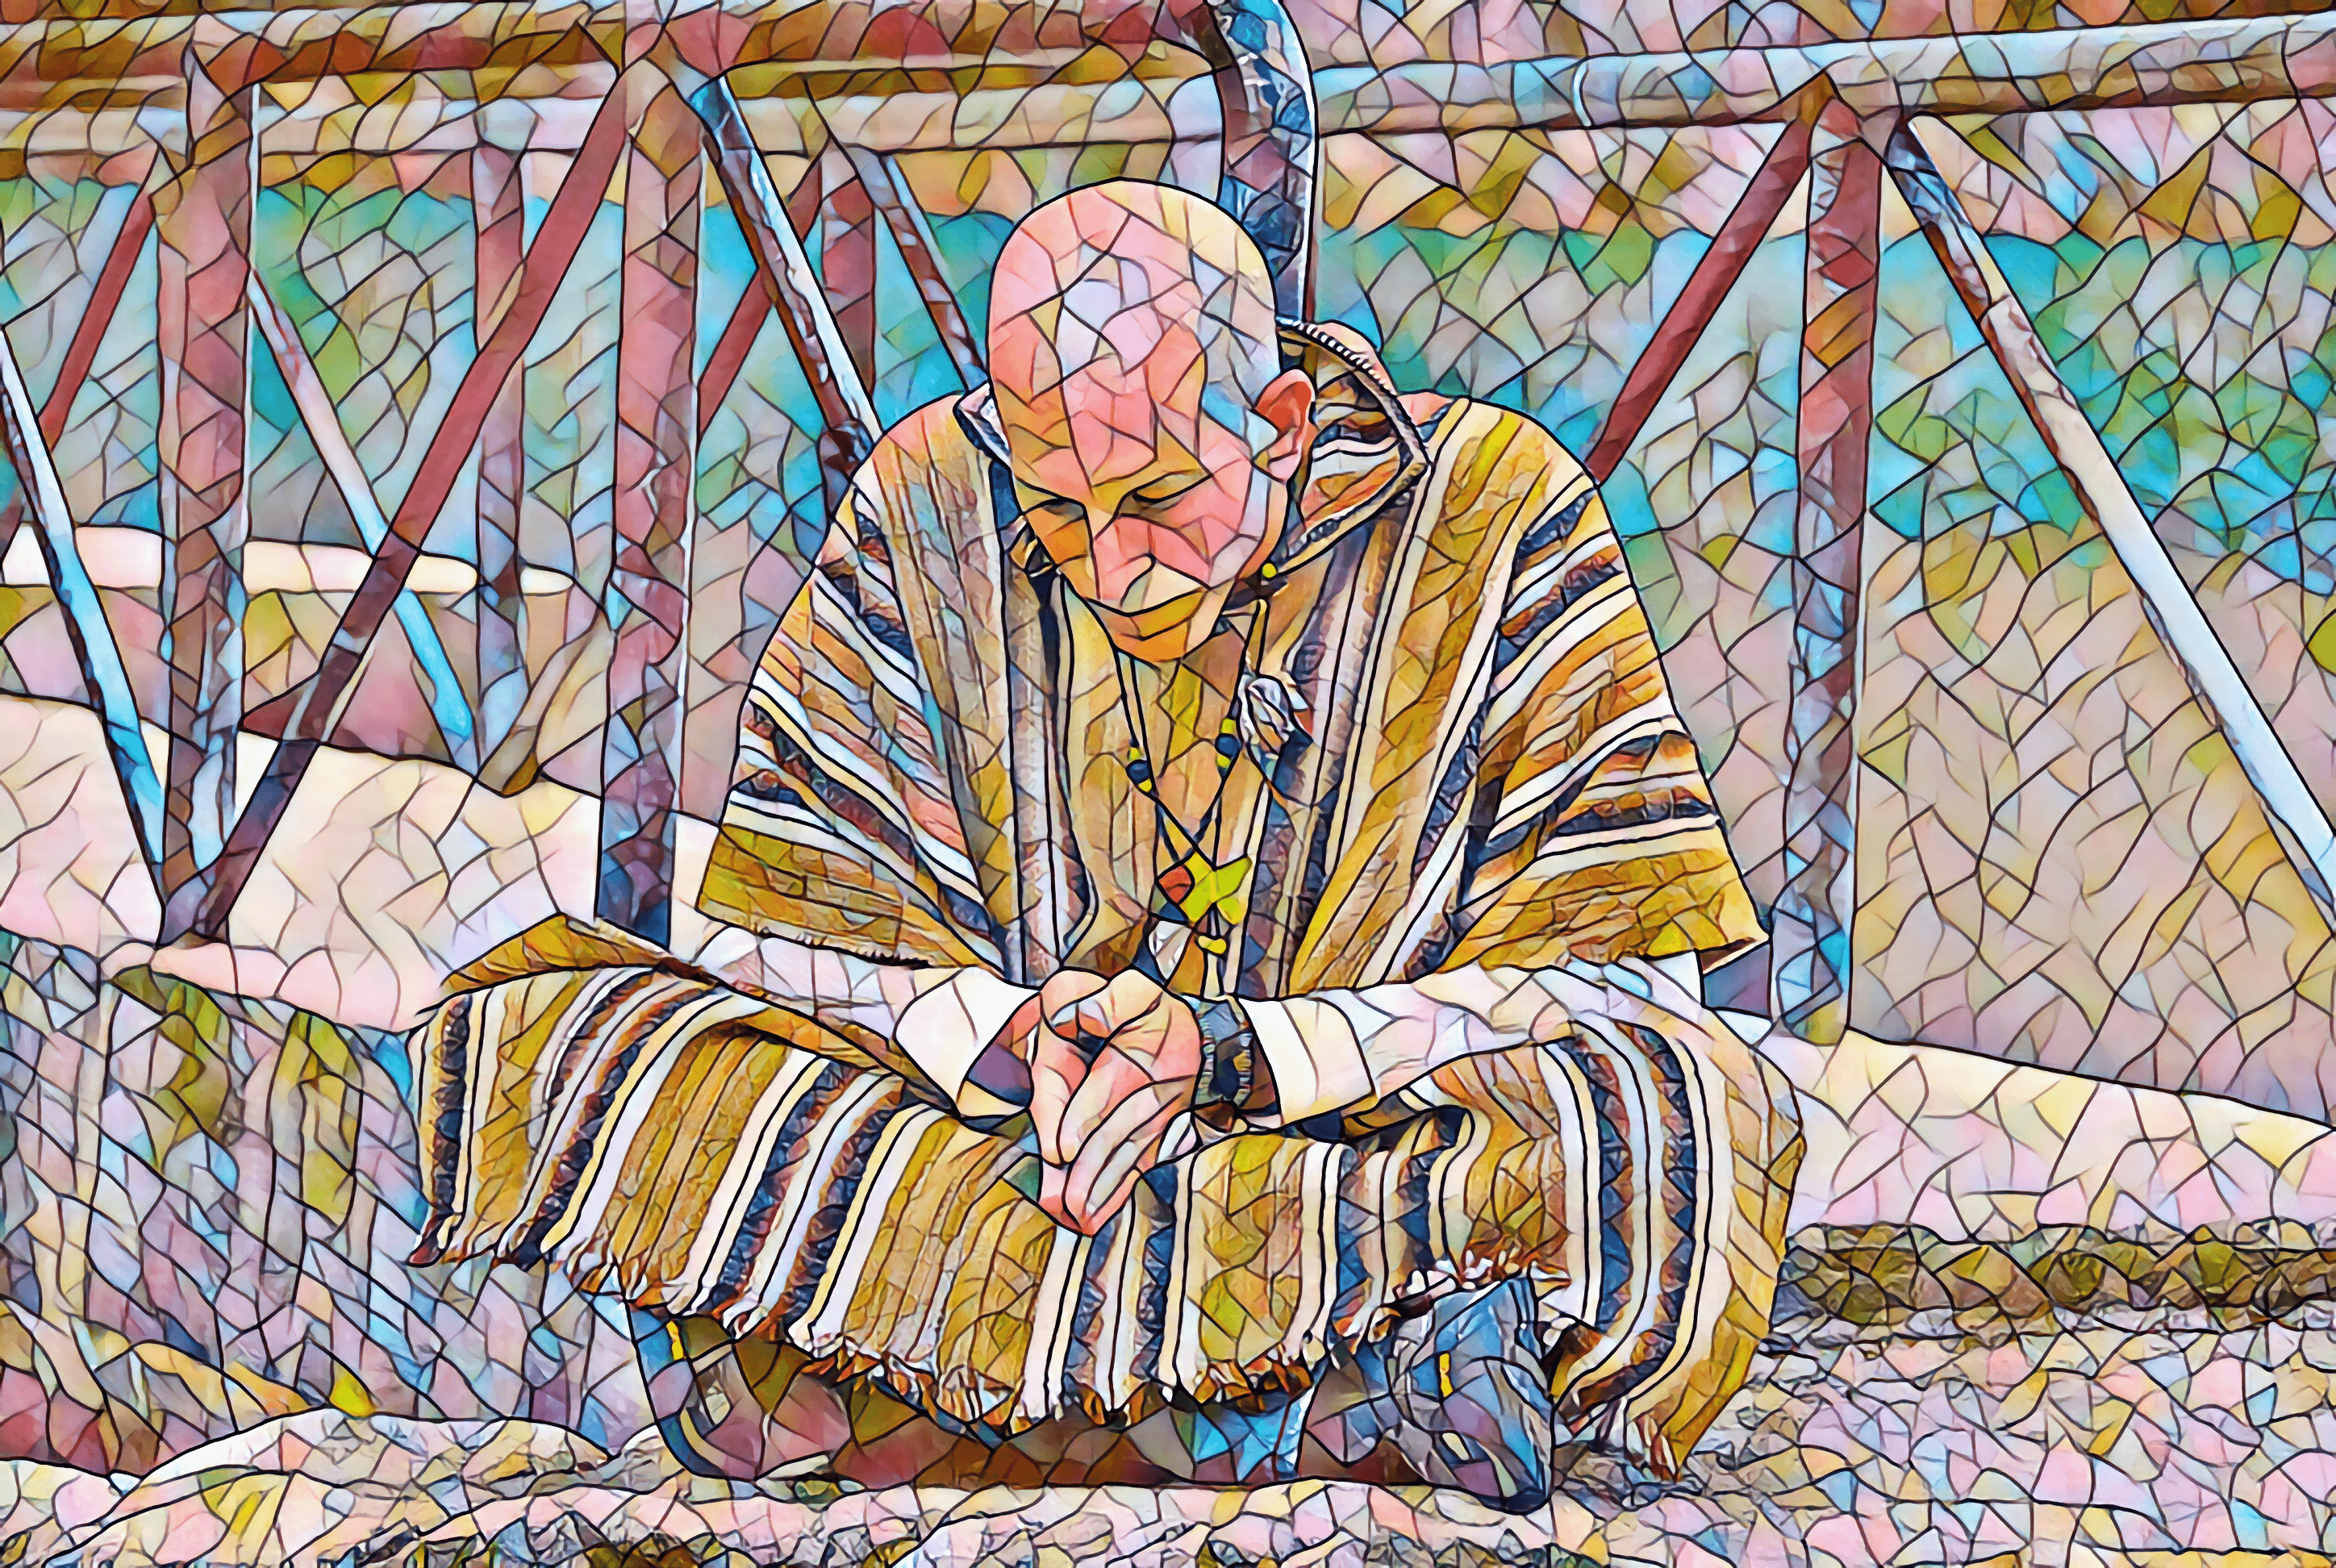 Shattered and Broken in Prayer Digital Mosaic by Brian Cimins